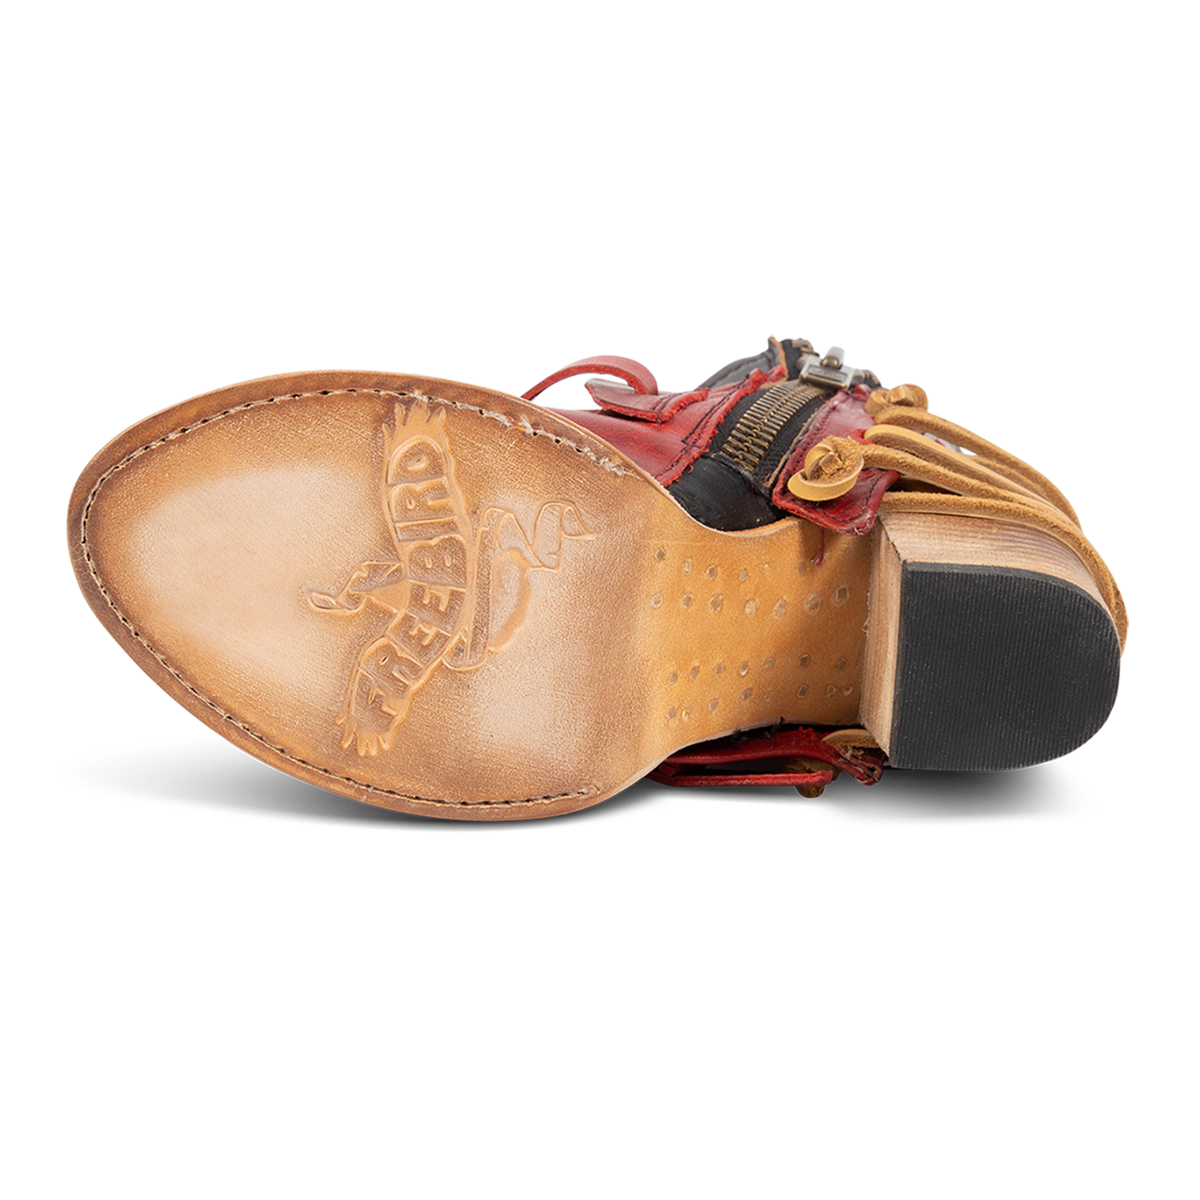 Leather sole imprinted with FREEBIRD on women's Carterr red multi sandal